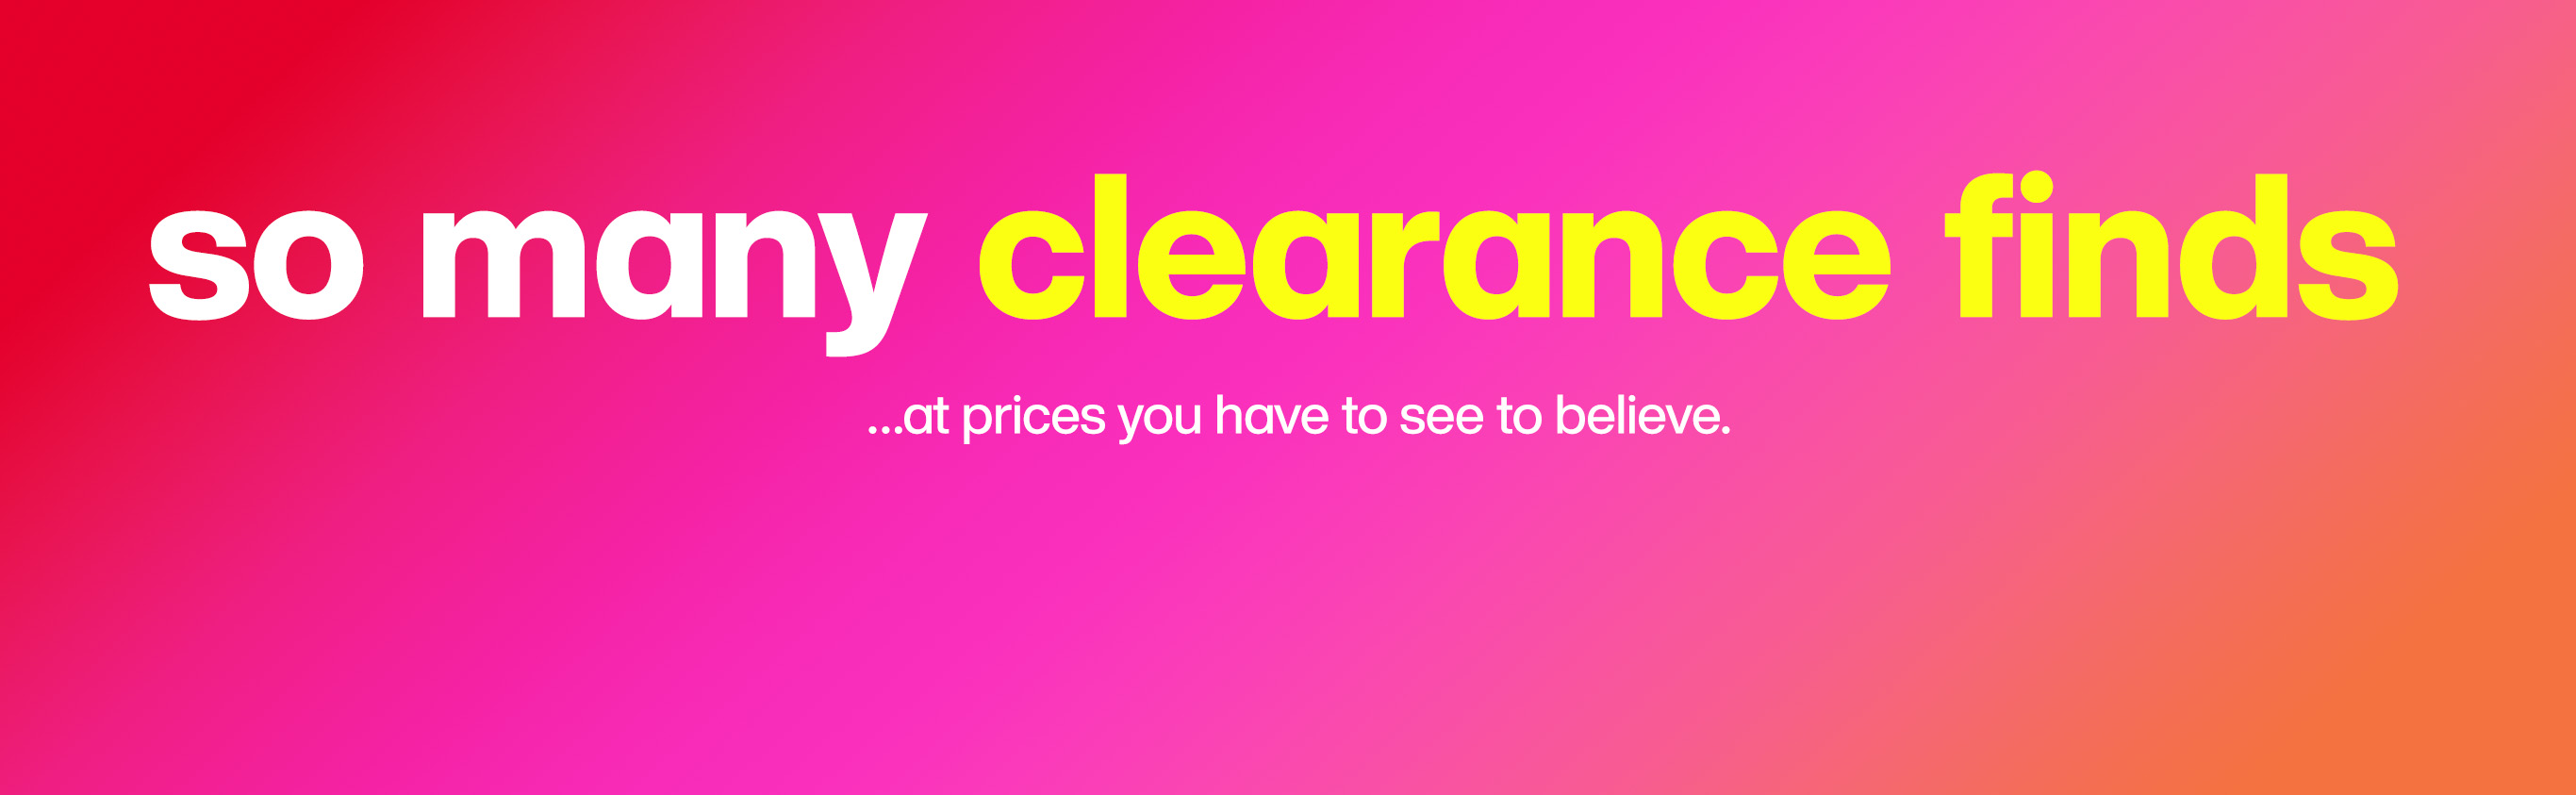 so many clearance finds ...at prices you have to see to believe.